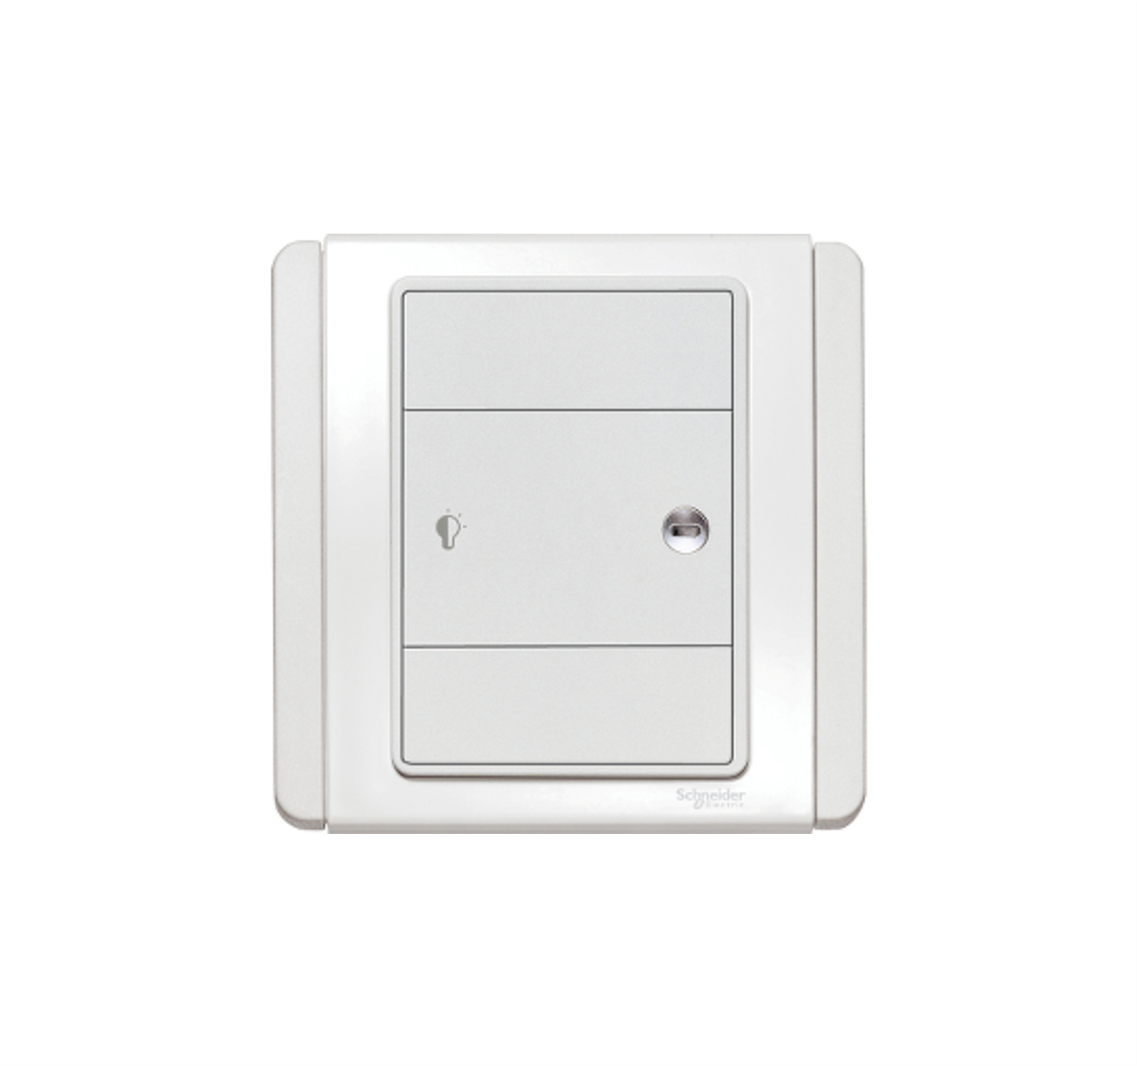 NEO - 600W 1 Gang Horizontal Dimming Switch with White LED (White)